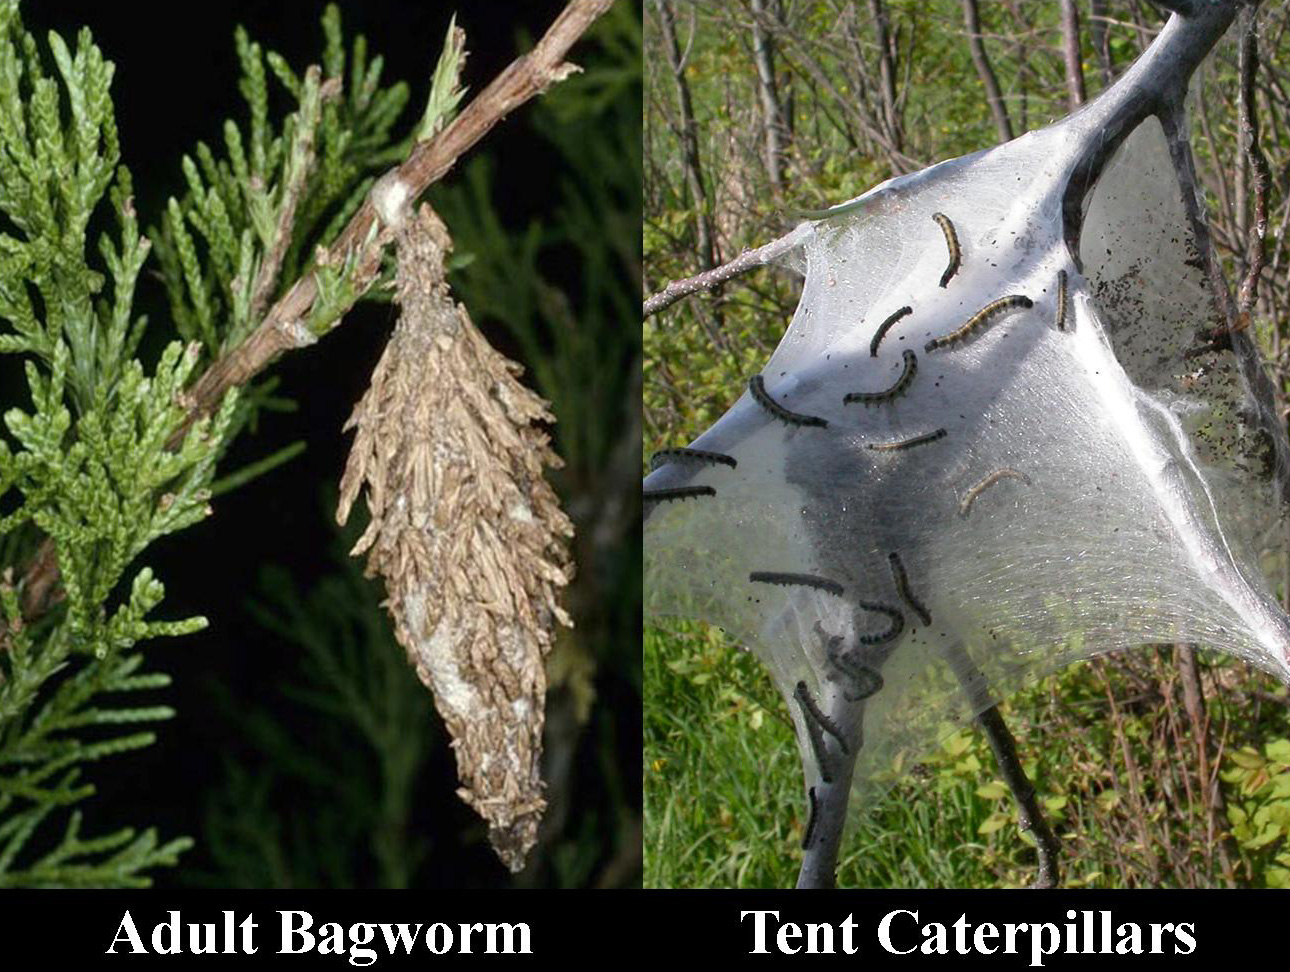 Bagworms and tent caterpillars